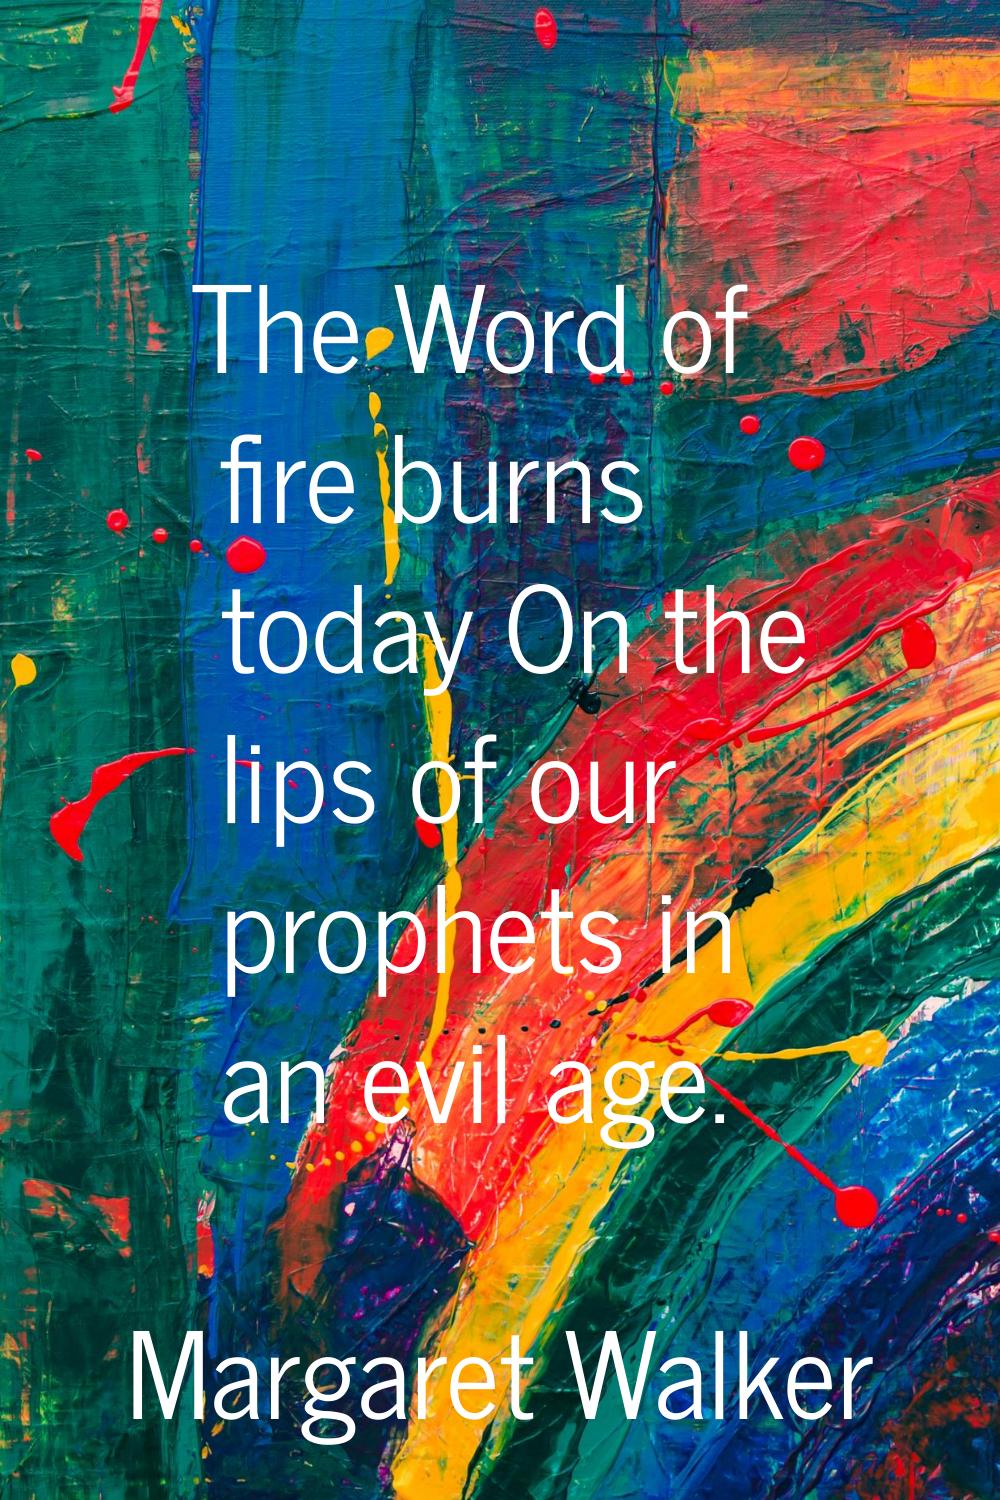 The Word of fire burns today On the lips of our prophets in an evil age.